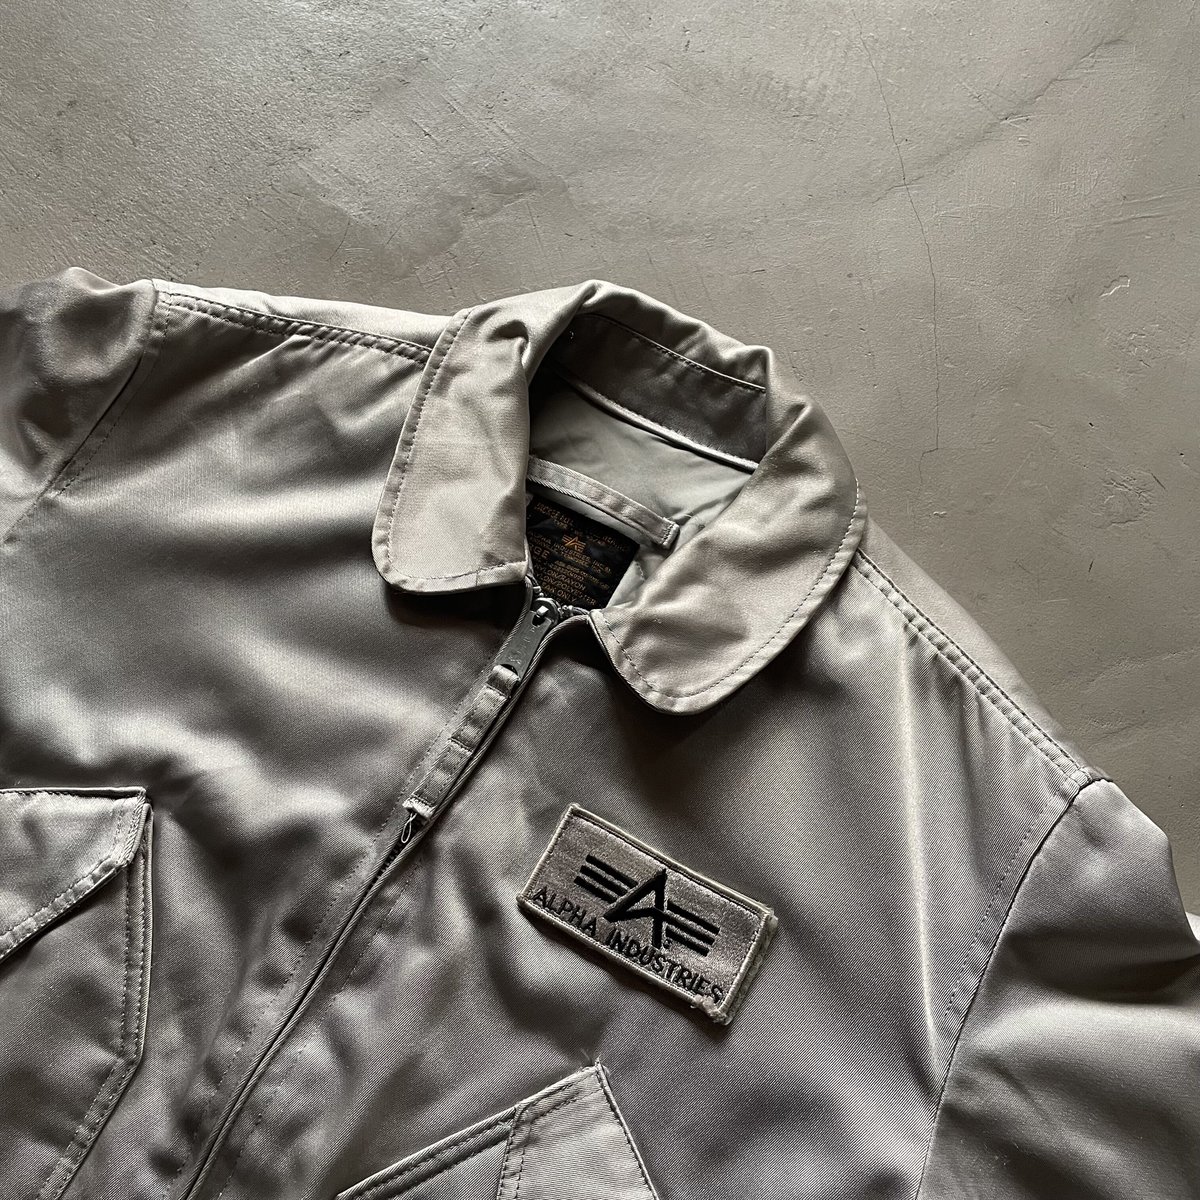 90s Alpha industries flight jacket type cwu-45p “made in USA”